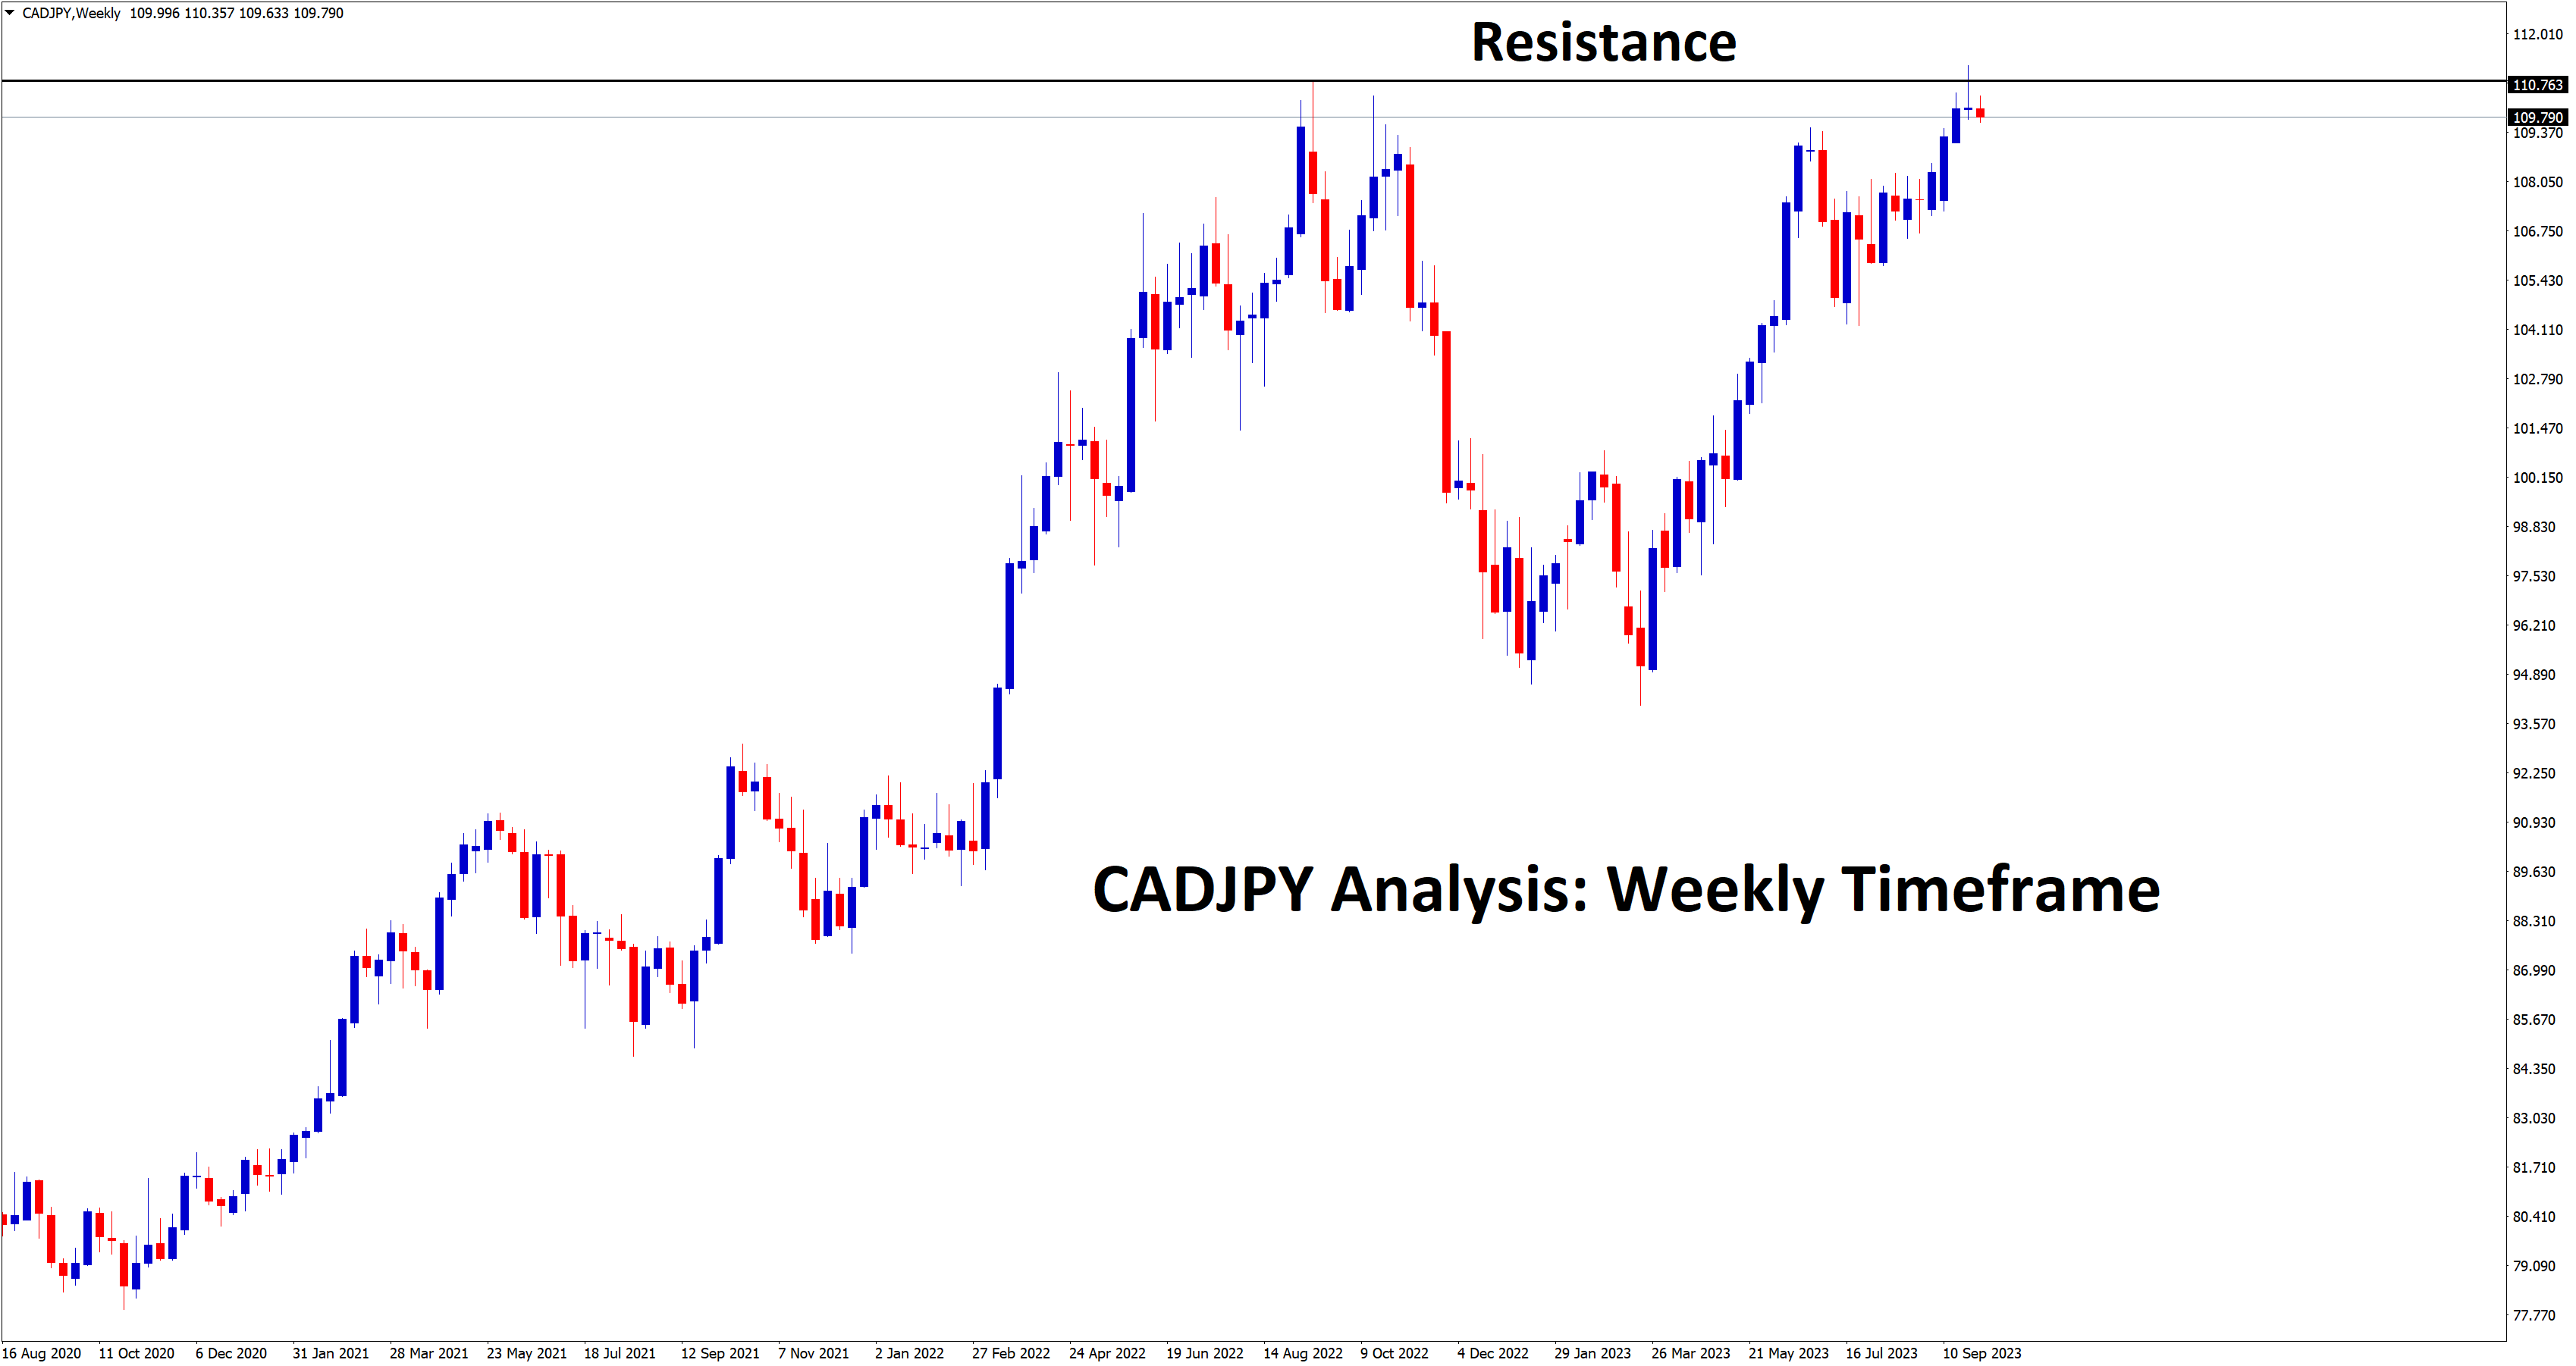 CADJPY is falling from the major resistance area